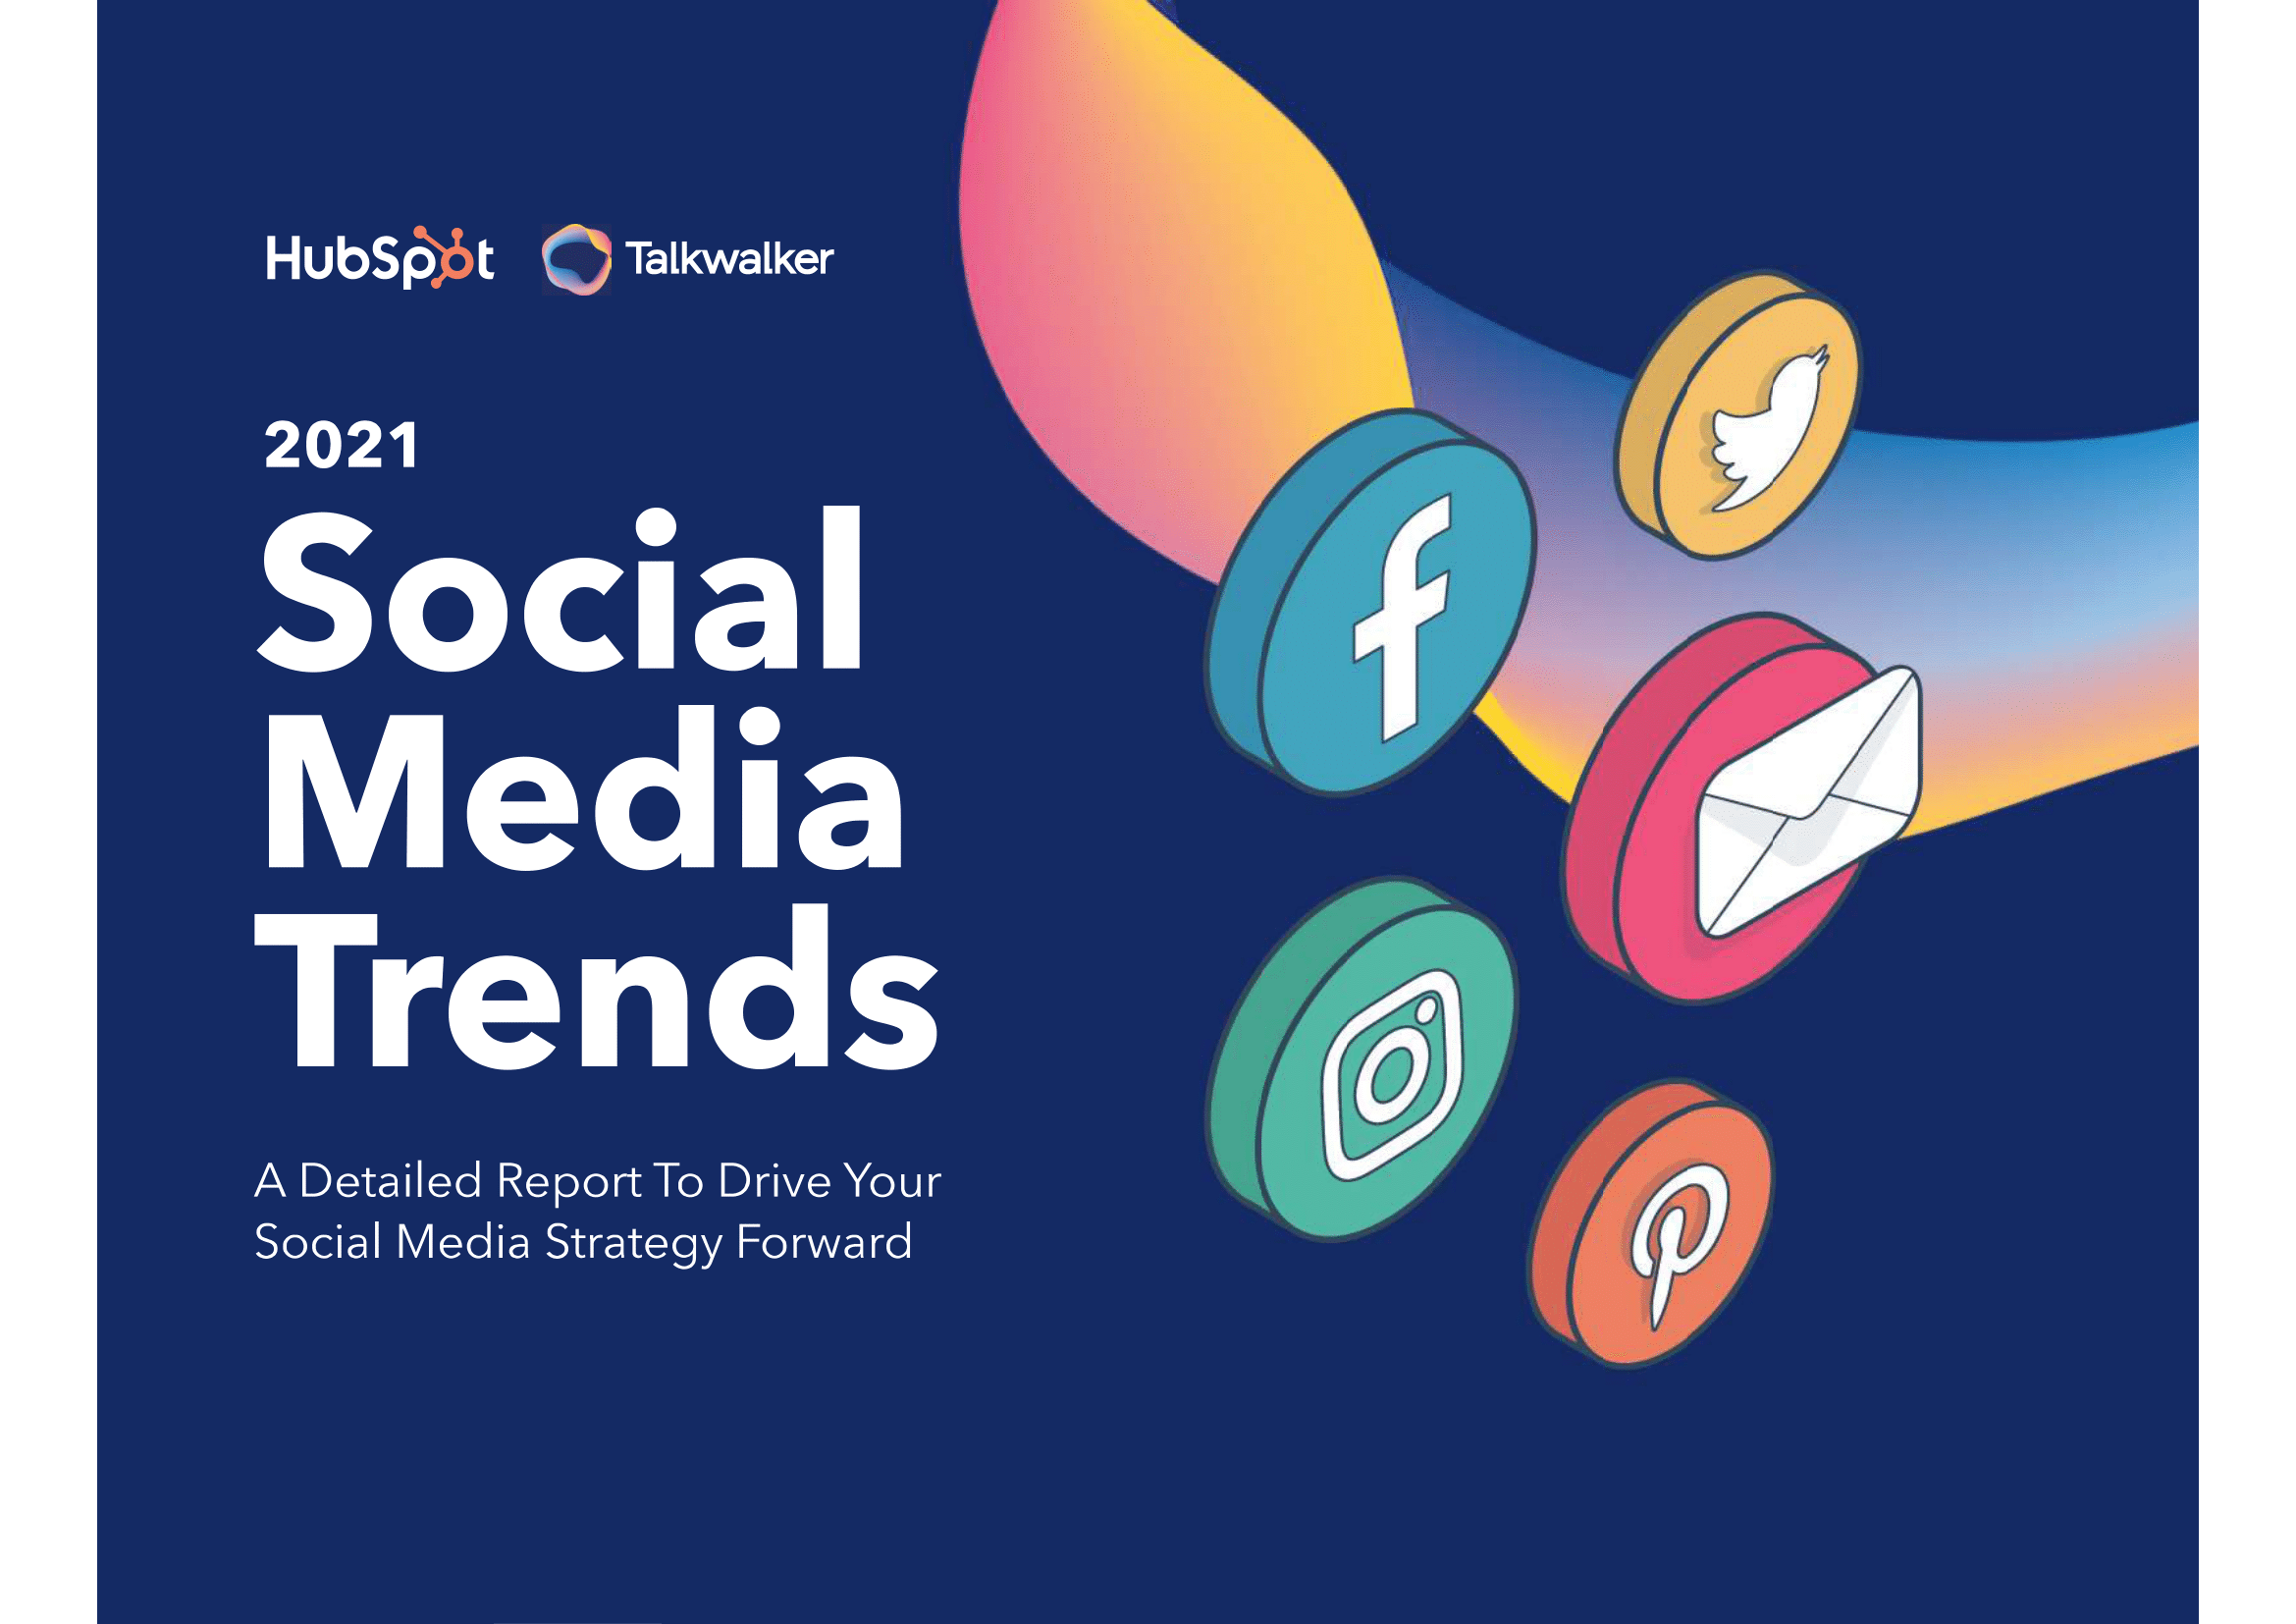 Talkwalker and HubSpot define the social media trends to watch in 2021